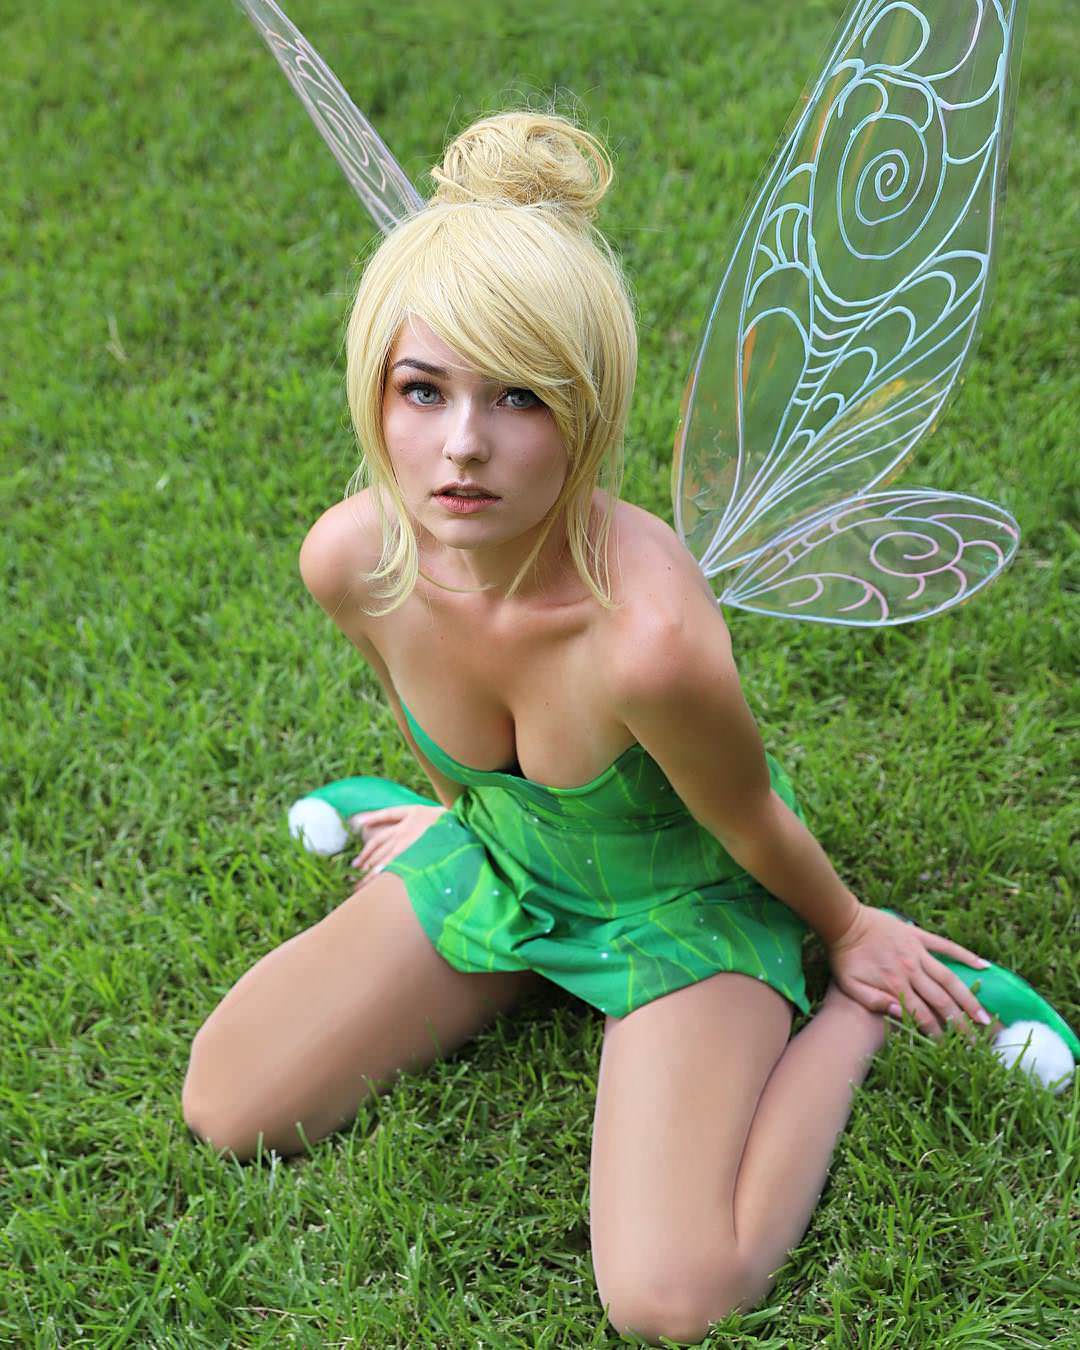 tinkerbell cosplay